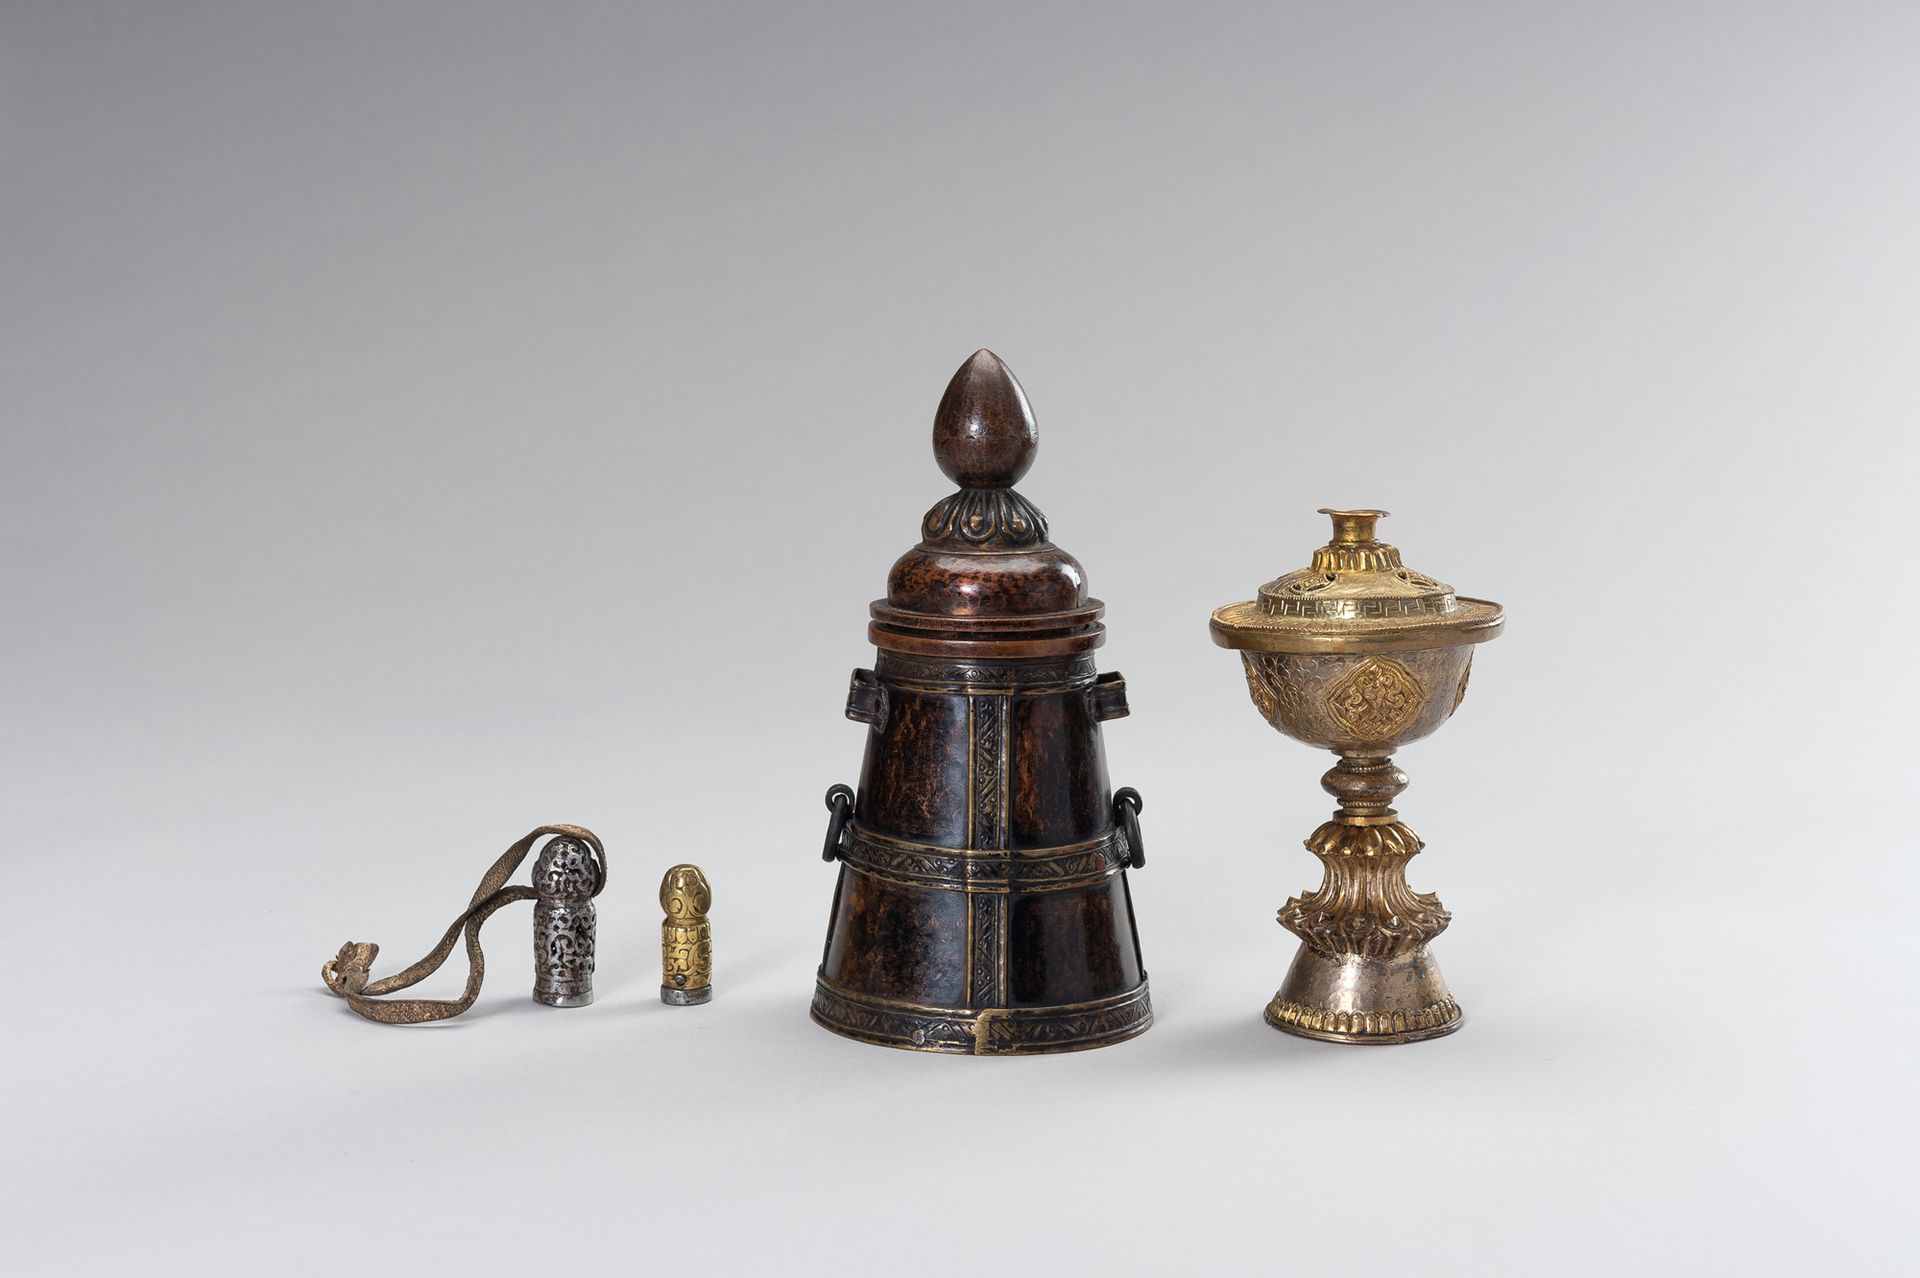 A GROUP OF TWO SEALS, A TSAMPA VESSEL AND A BUTTER LAMP UNGRUPPO DI DUE SIGILLI,&hellip;